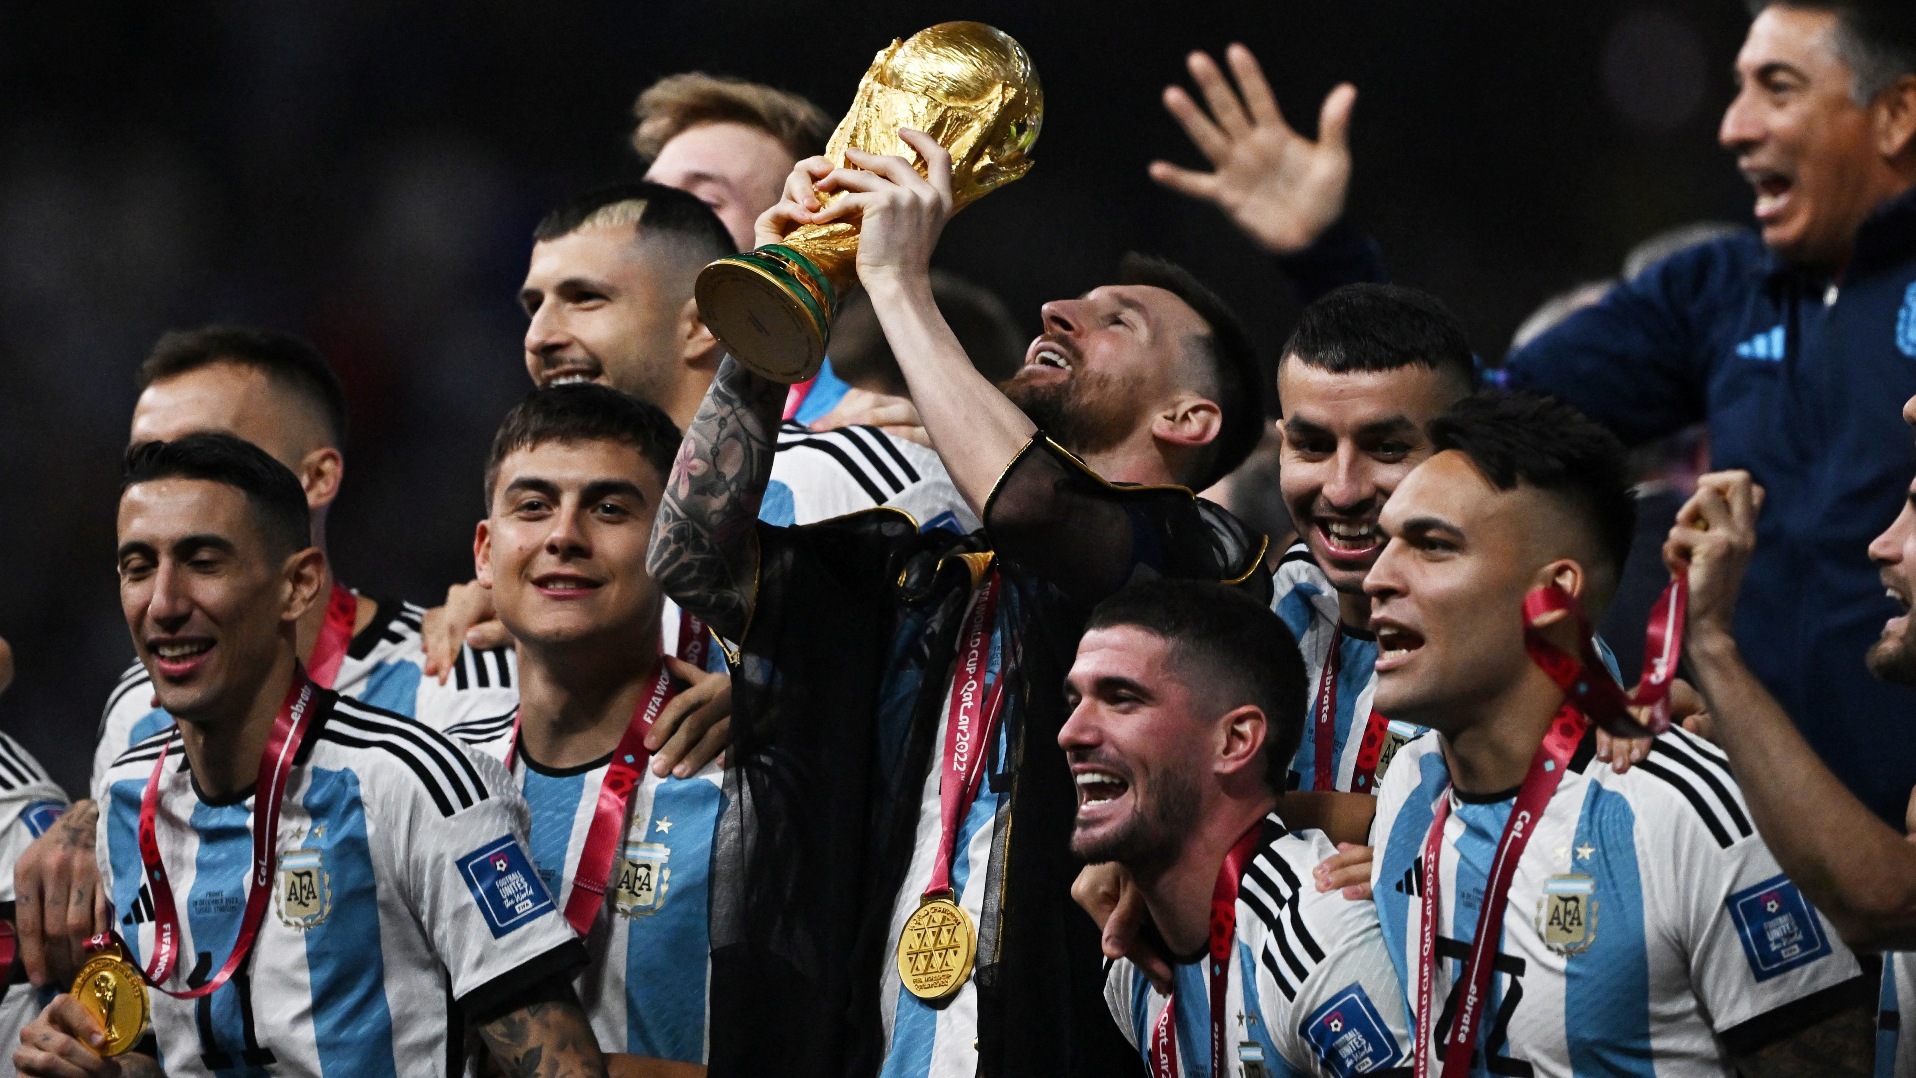 Argentina's players were the winners in Qatar, but will there be a legacy from the World Cup. /Dylan Martinez/Reuters